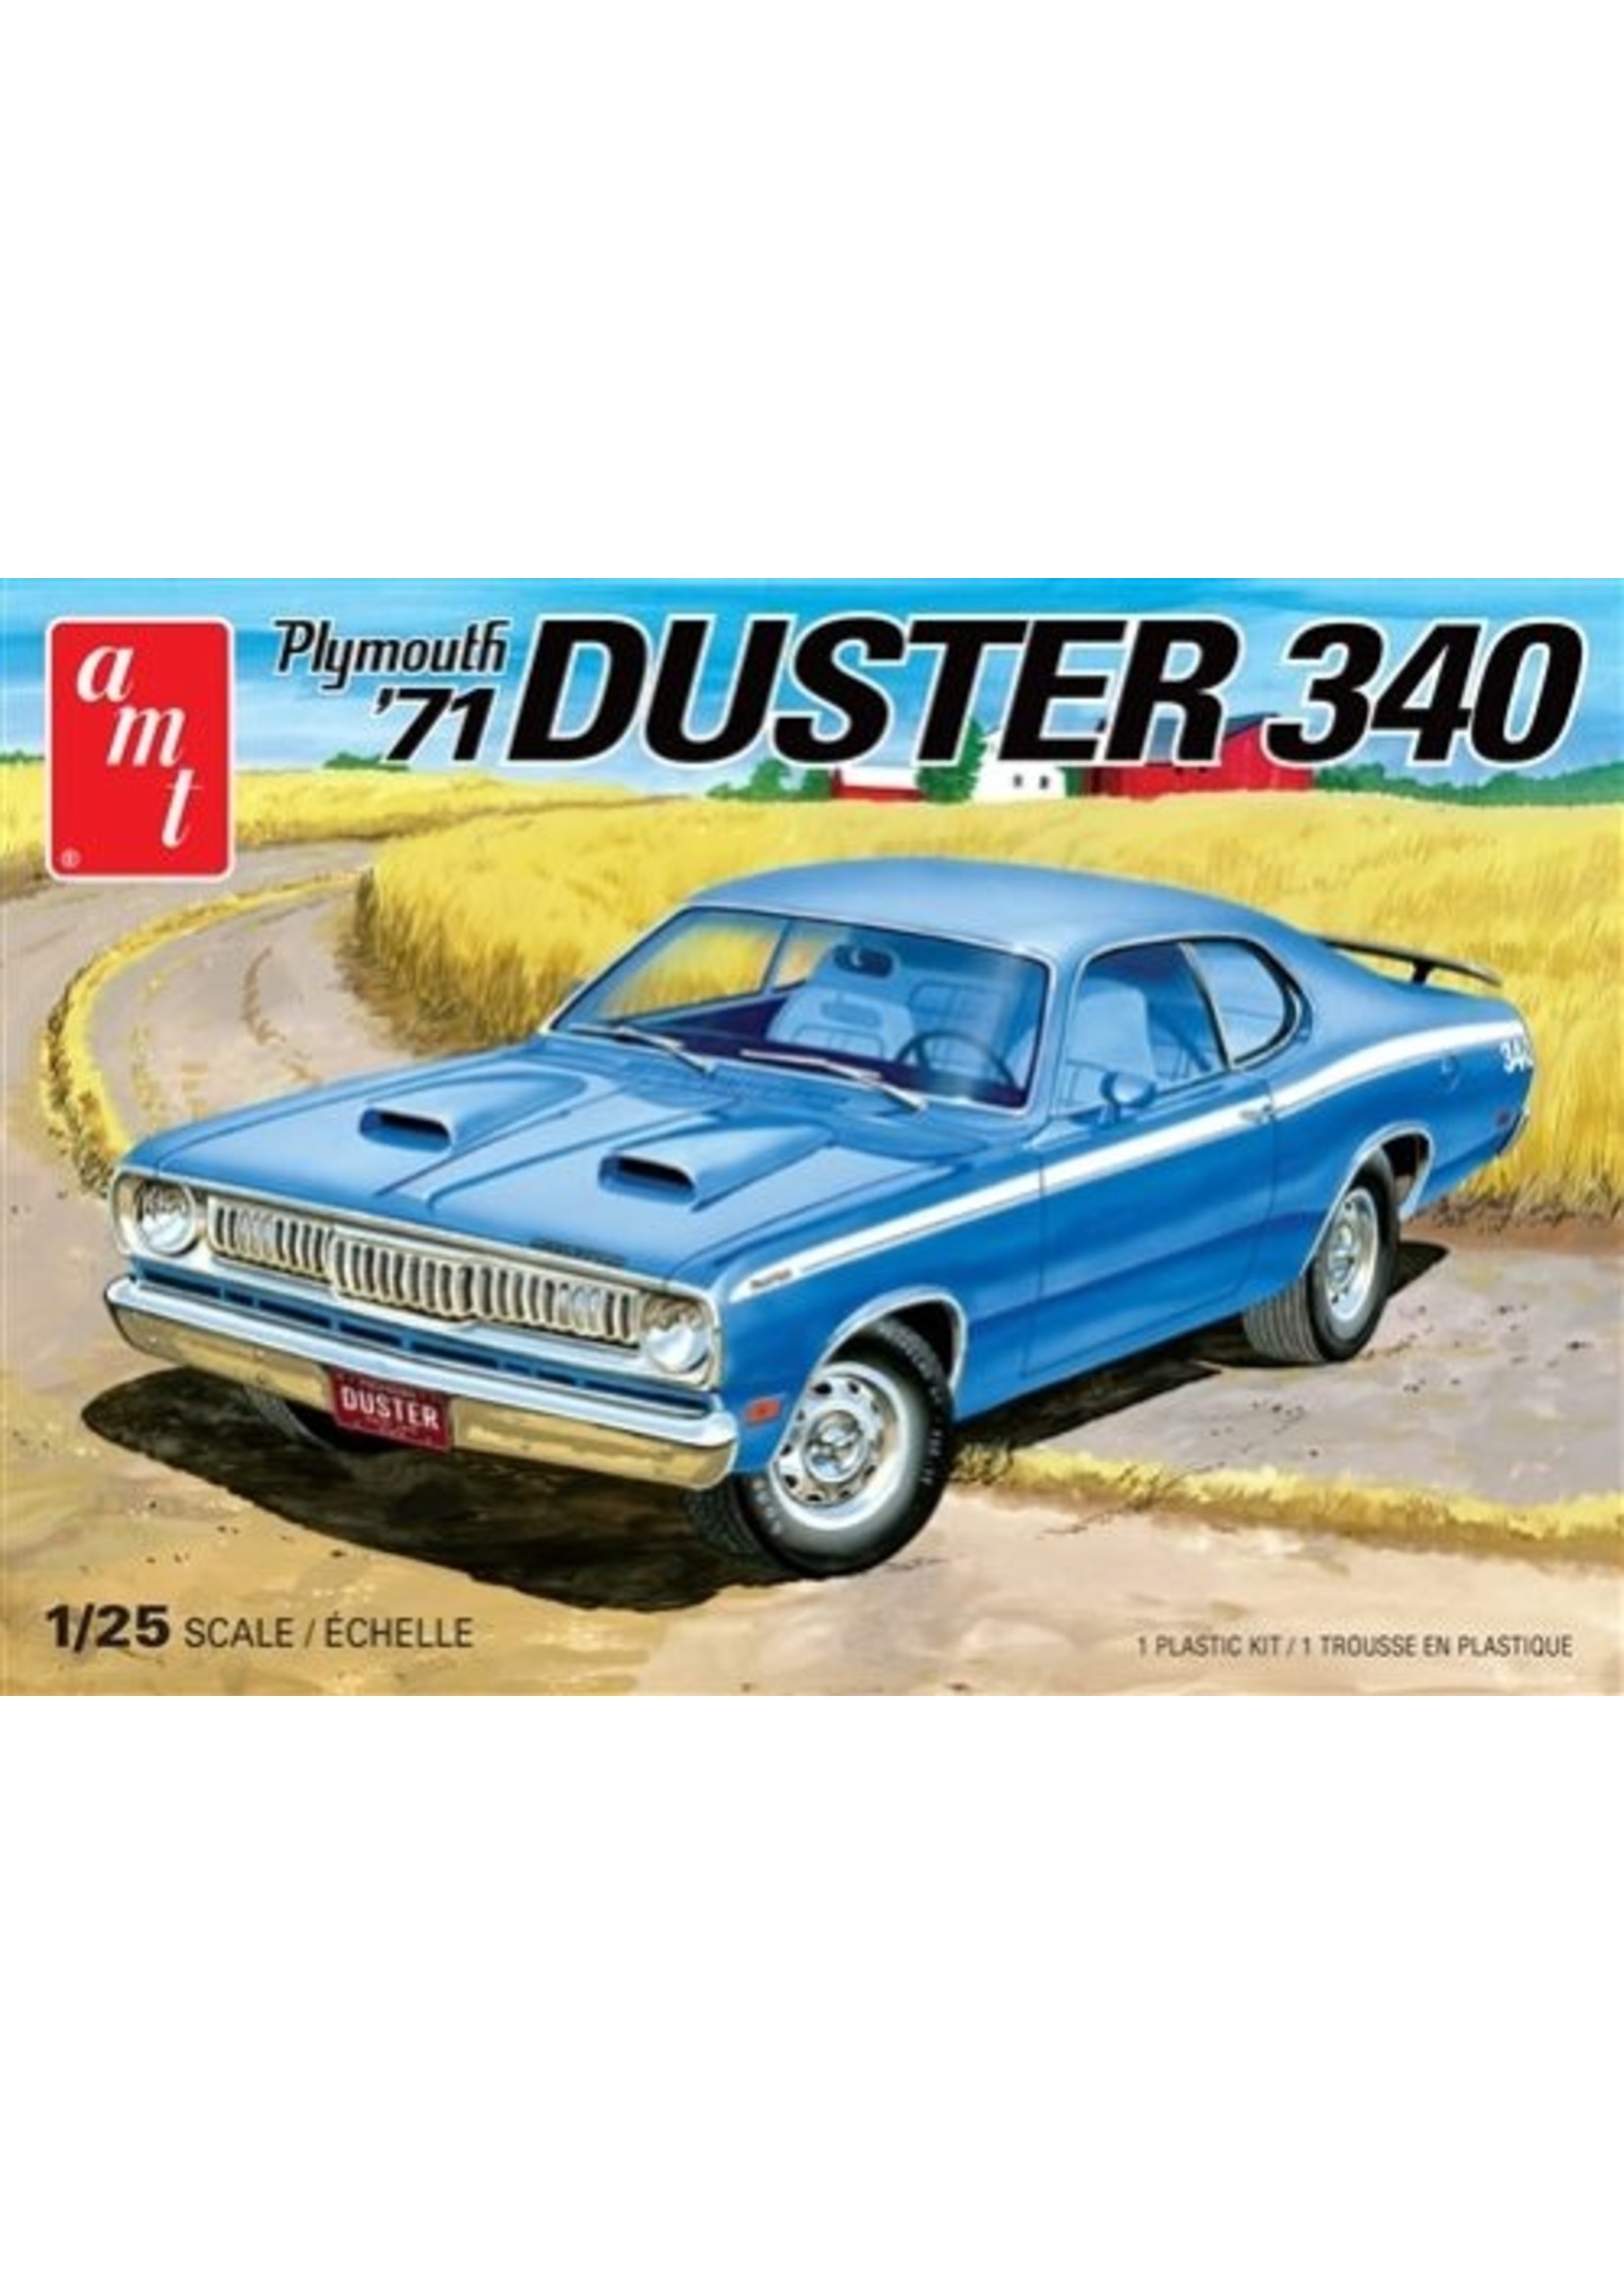 AMT 1118 - 1/25 1971 Plymouth Duster 340